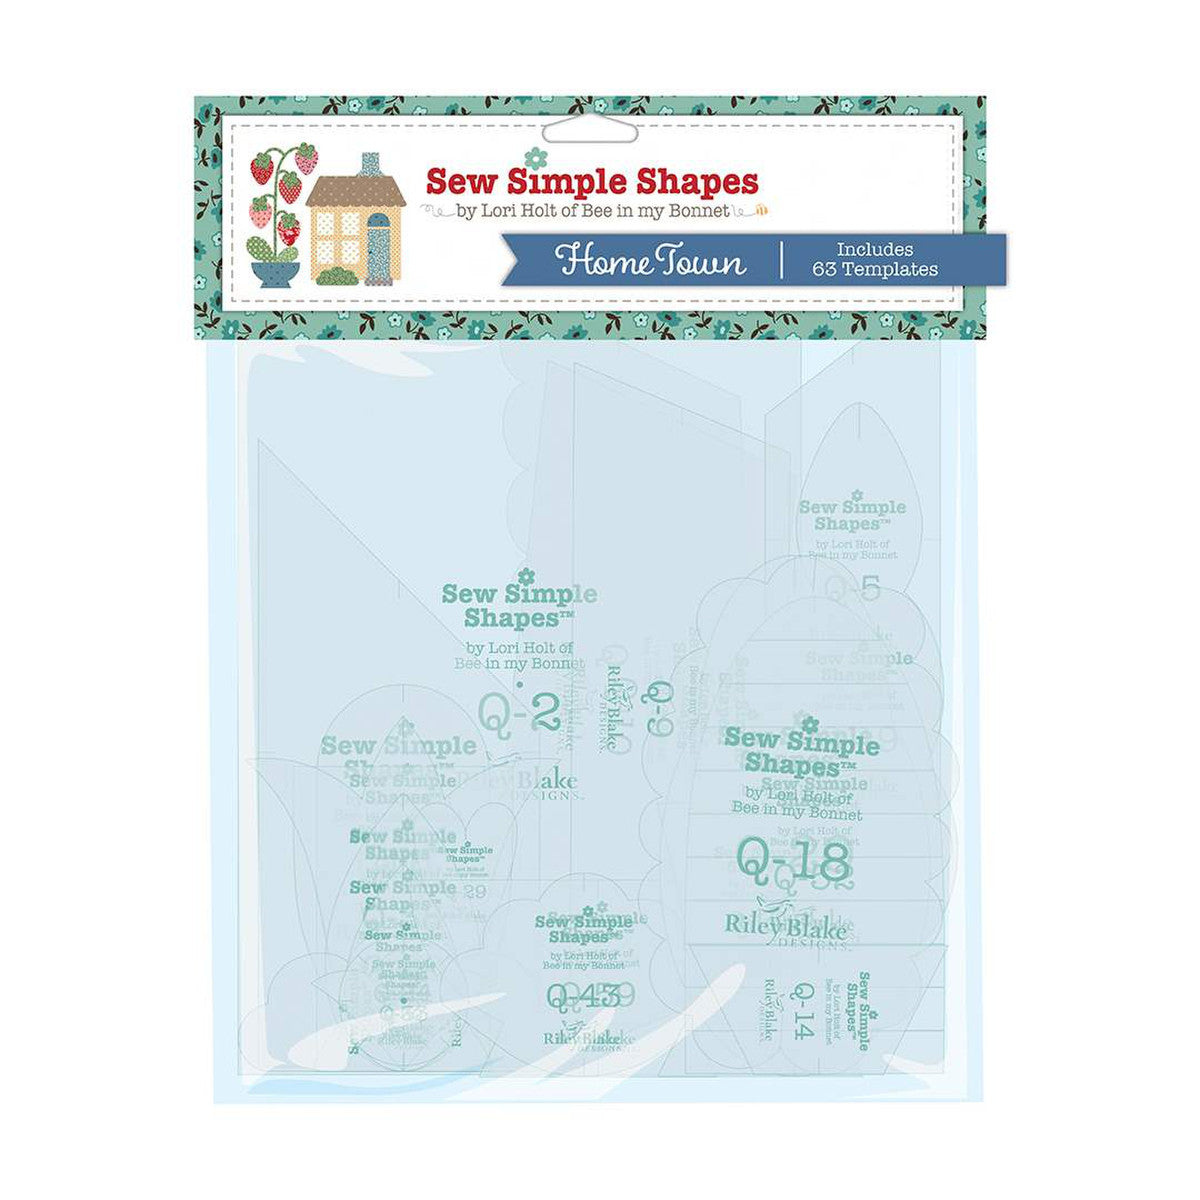 Hometown Templates - Sew Simple Shapes